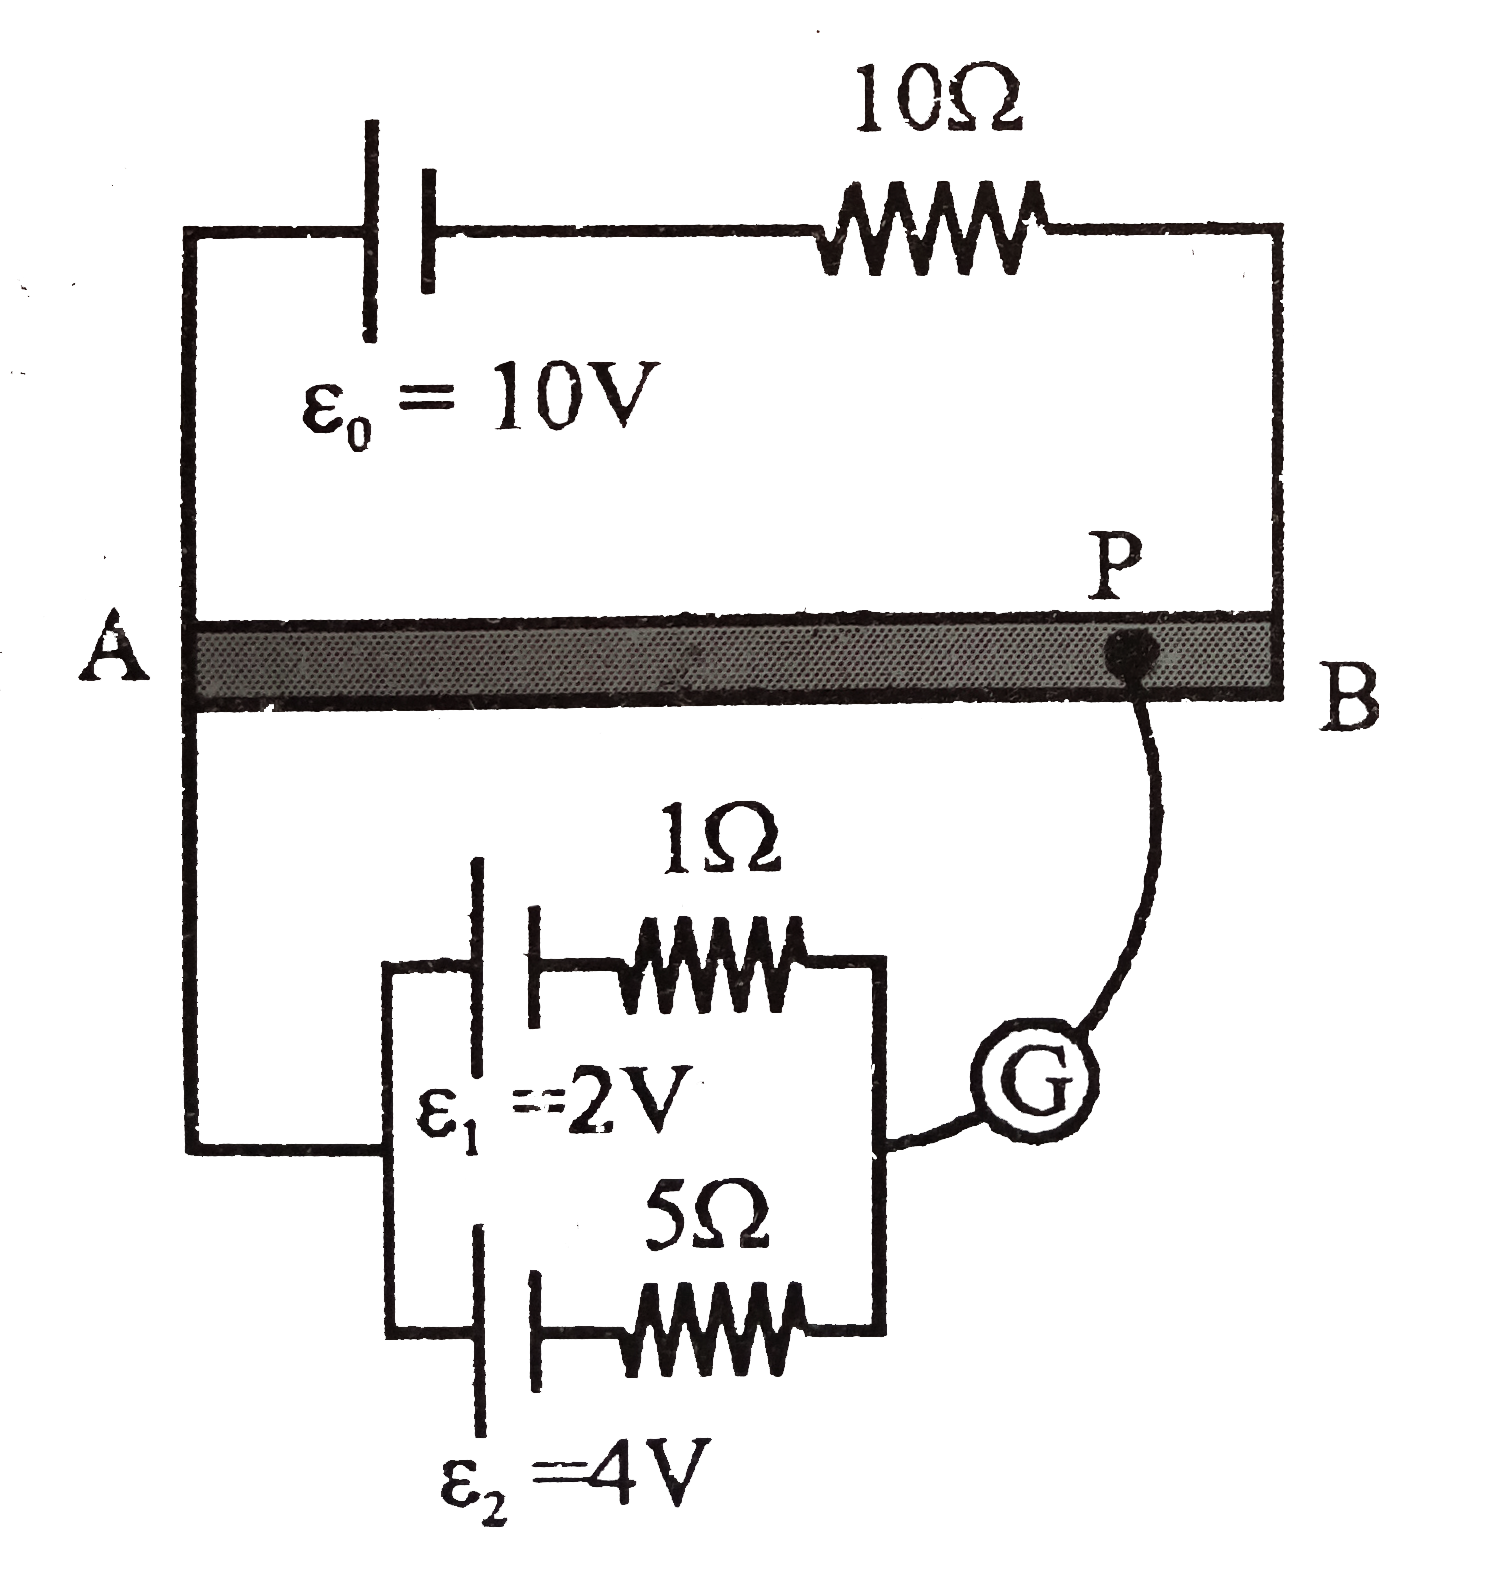 A battery of emf epsilon0=10V is connected across a 1m long uniform wire having resistance 10Omega//m. Two cells of emf epsilon1=2V and epsilon2=4V having internal resistance 1Omega and 5Omega respectively are connected as shown in the figure. If a galvanometer shows no deflection at the point P, find the distance of point P from the point a.